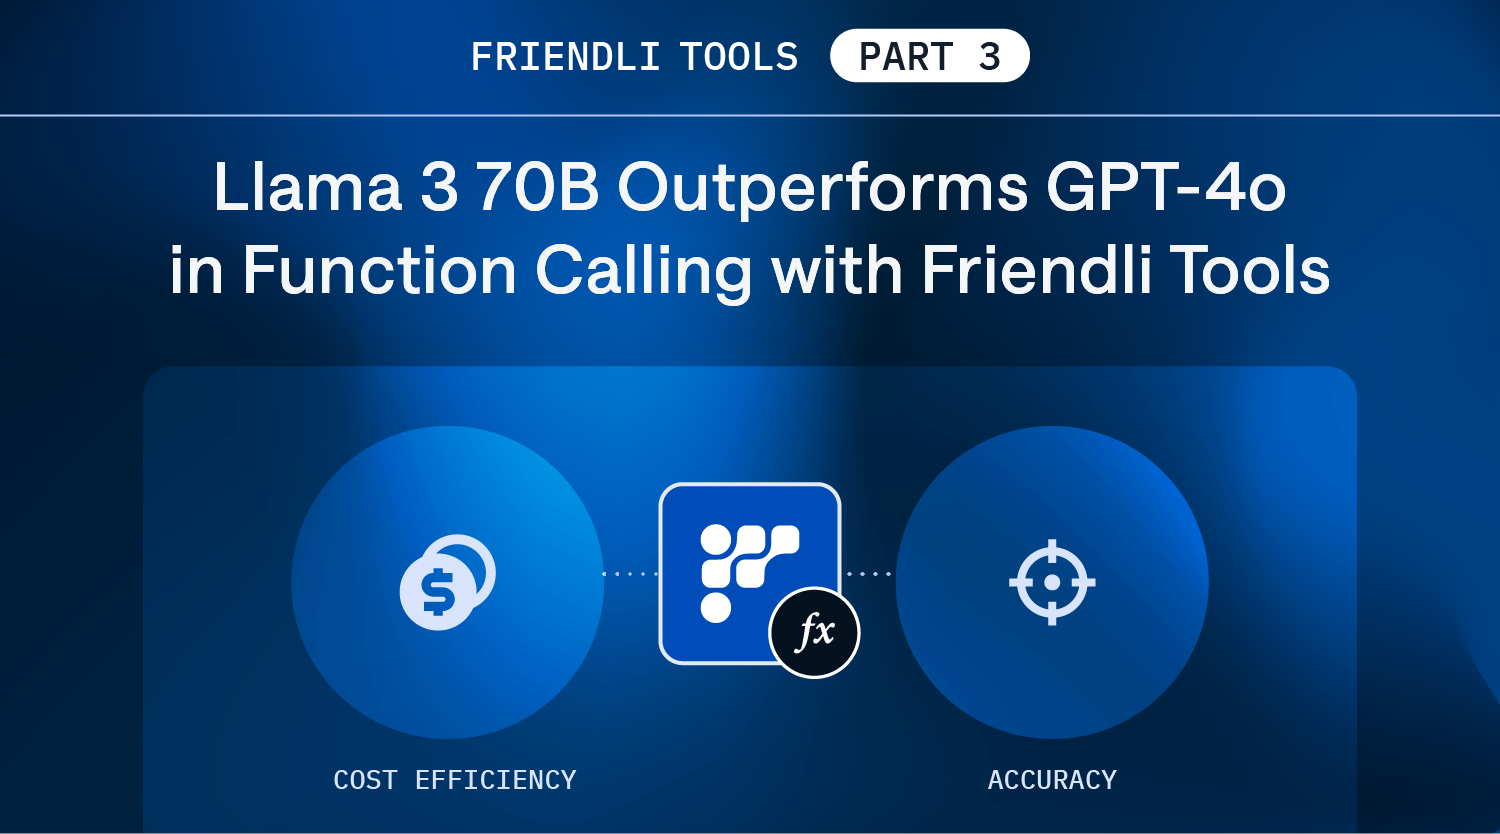 Llama 3 70B Outperforms GPT-4o in Function Calling with Friendli Tools thumbnail